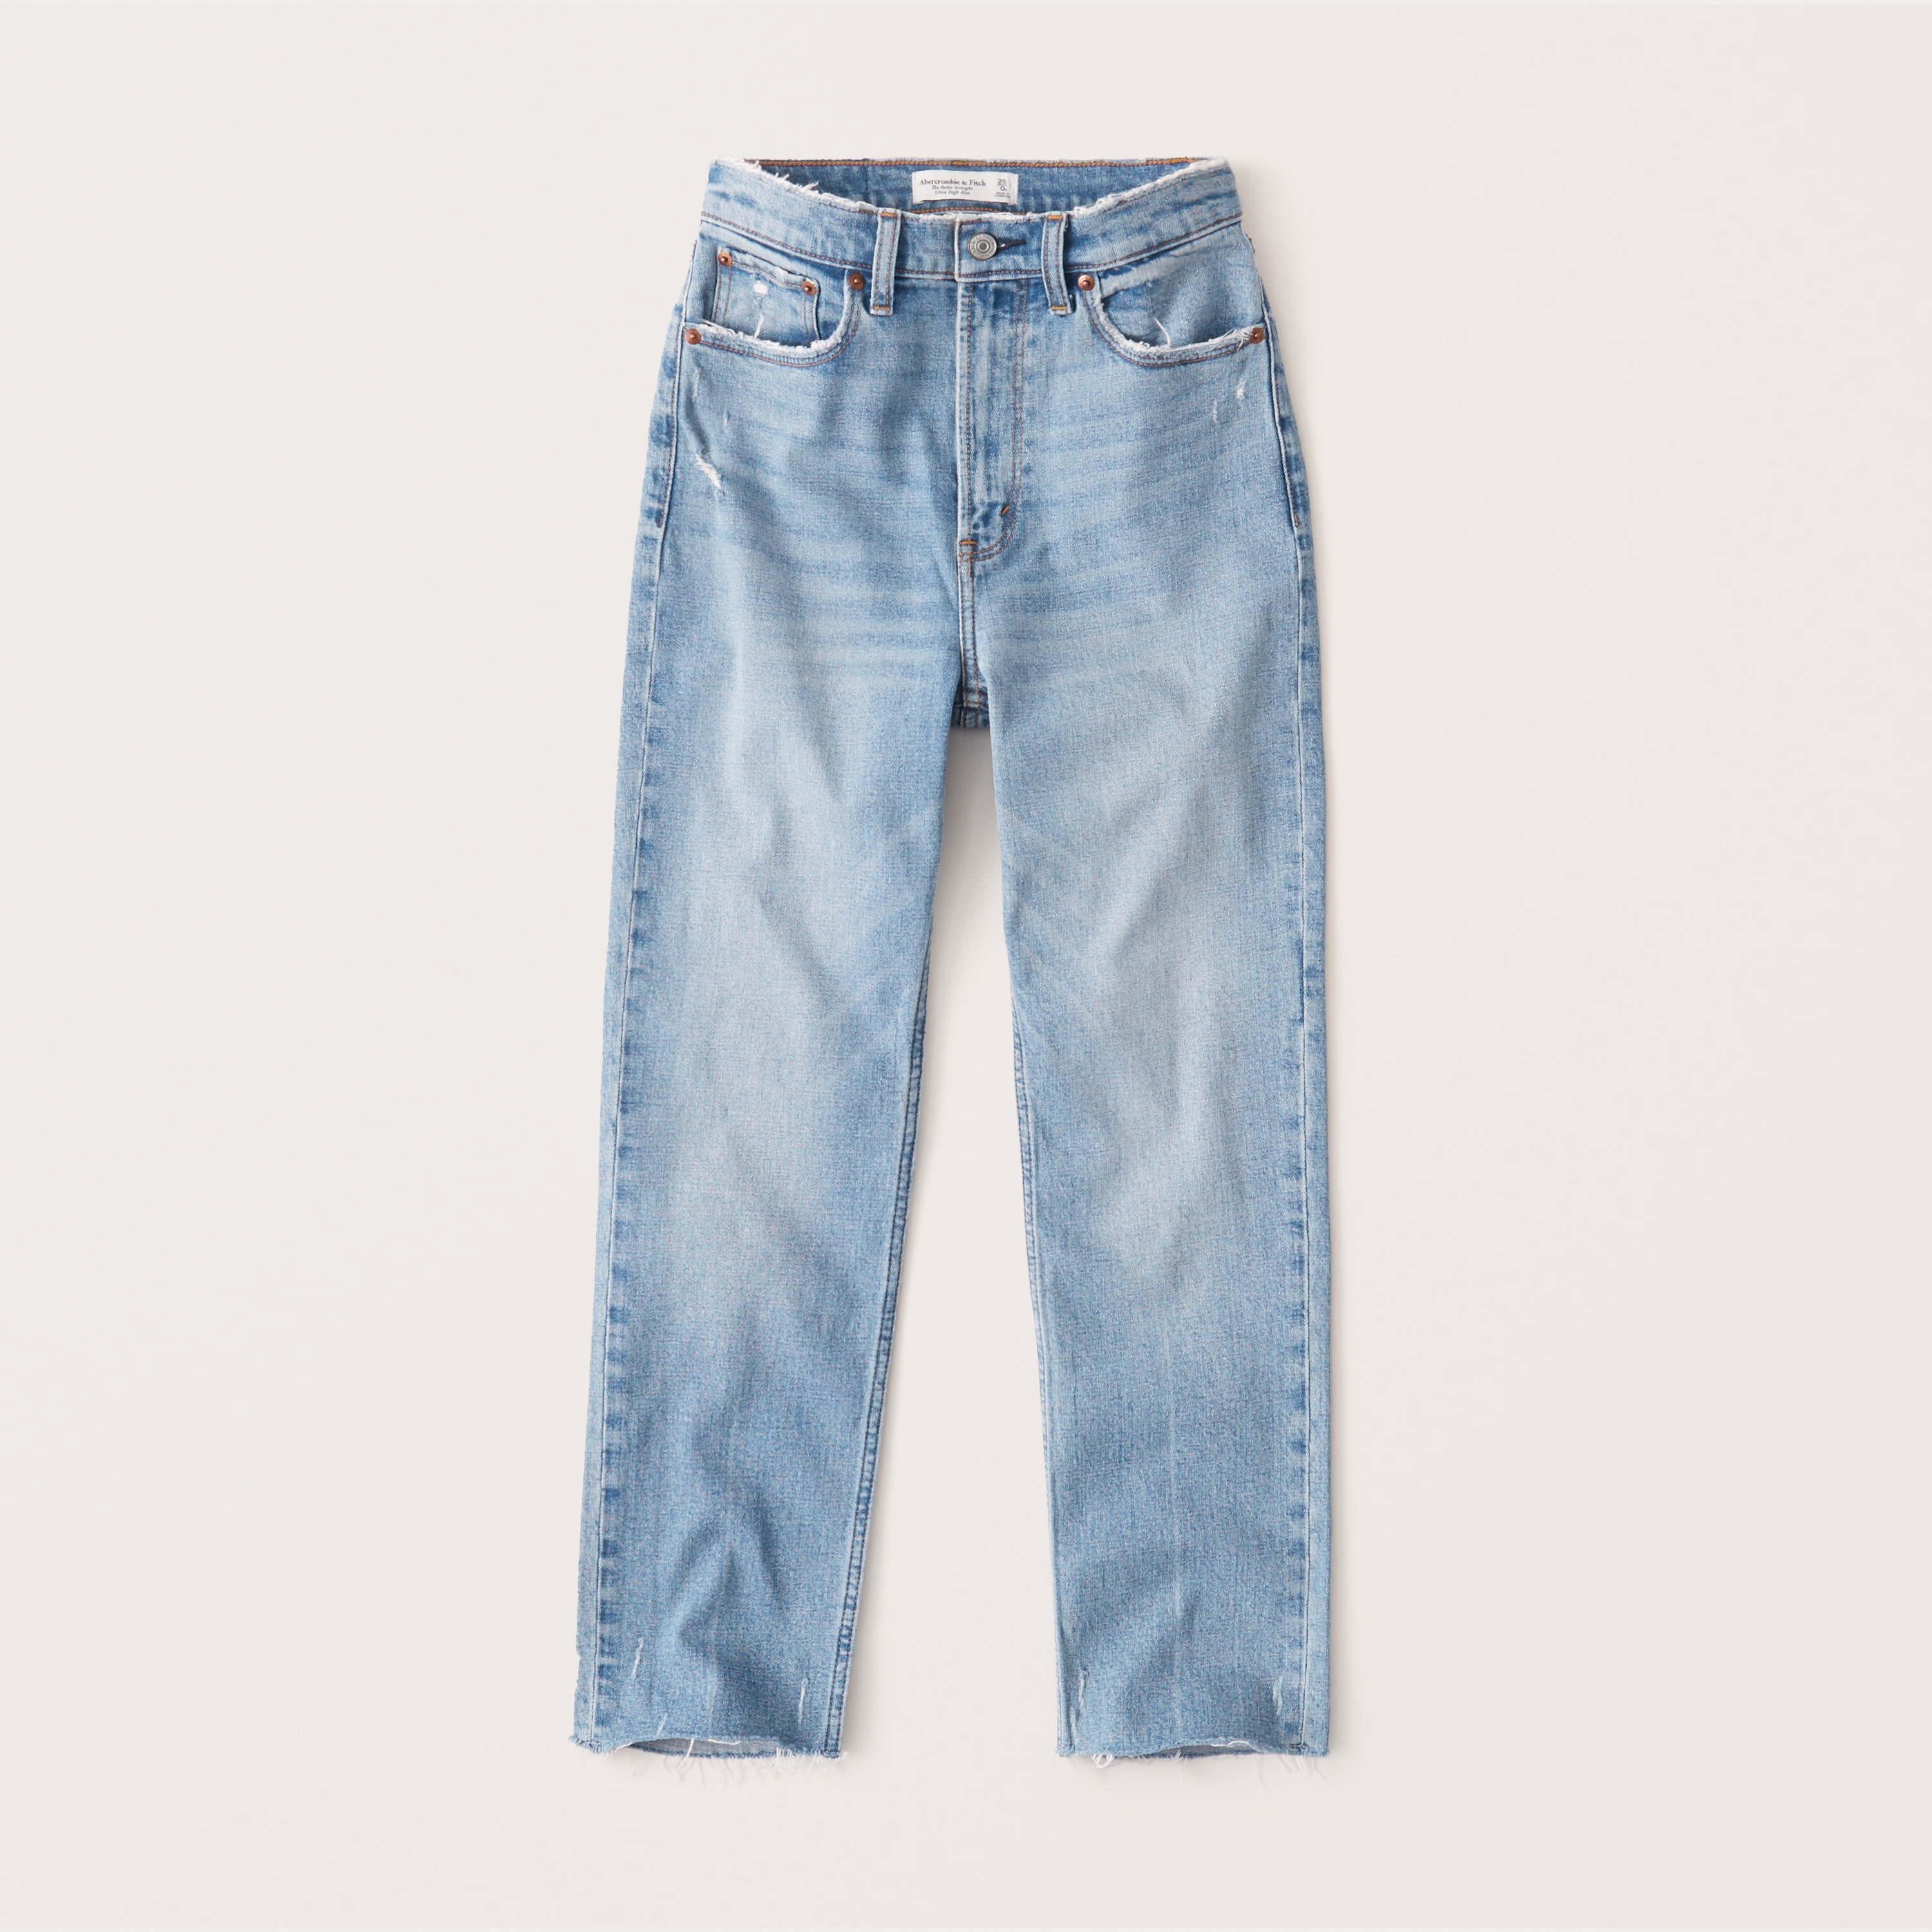 abercrombie and fitch zoe jeans